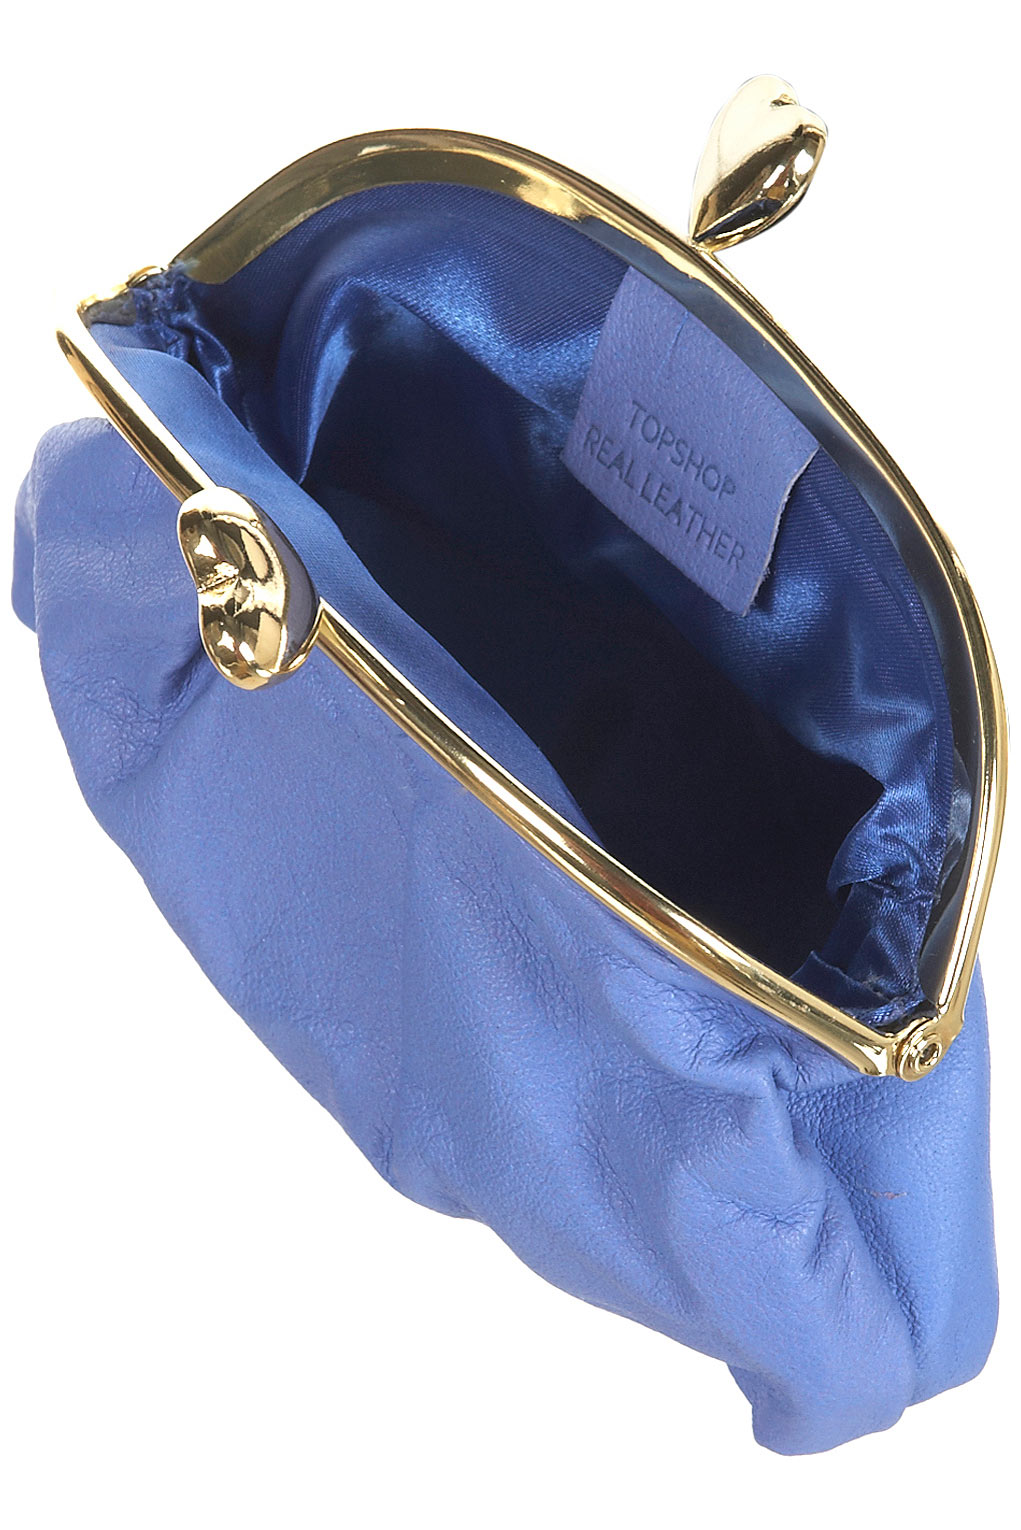 TOPSHOP Heart Clasp Purse in Blue - Lyst